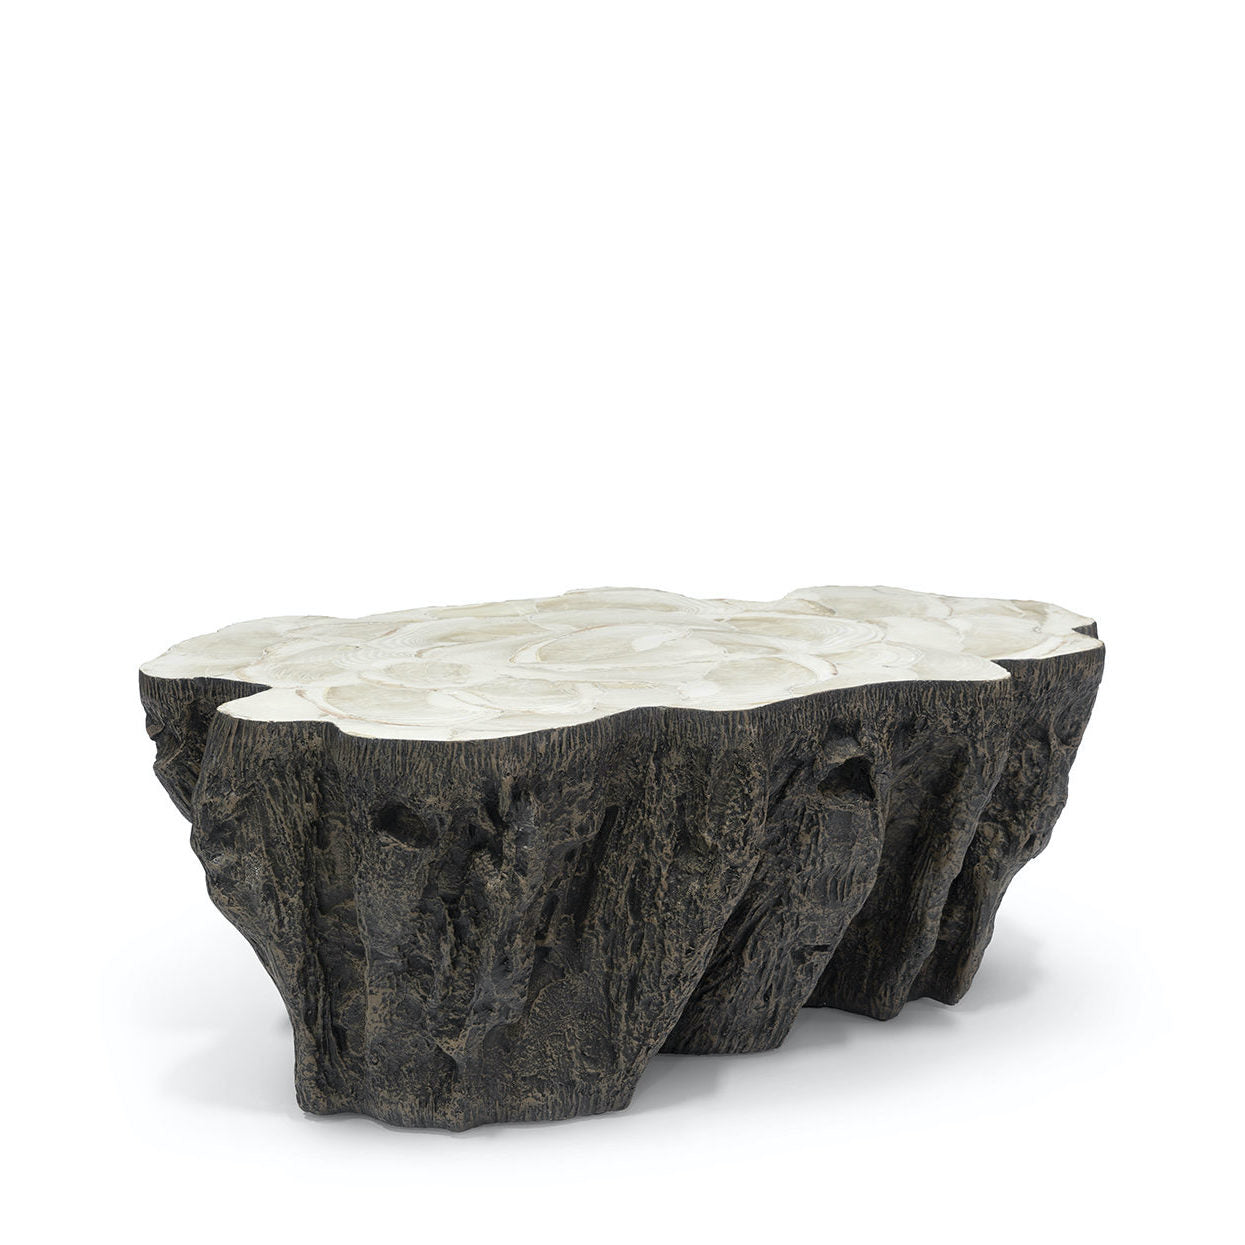 Inlaid Fossilized Clamshell Coffee Table